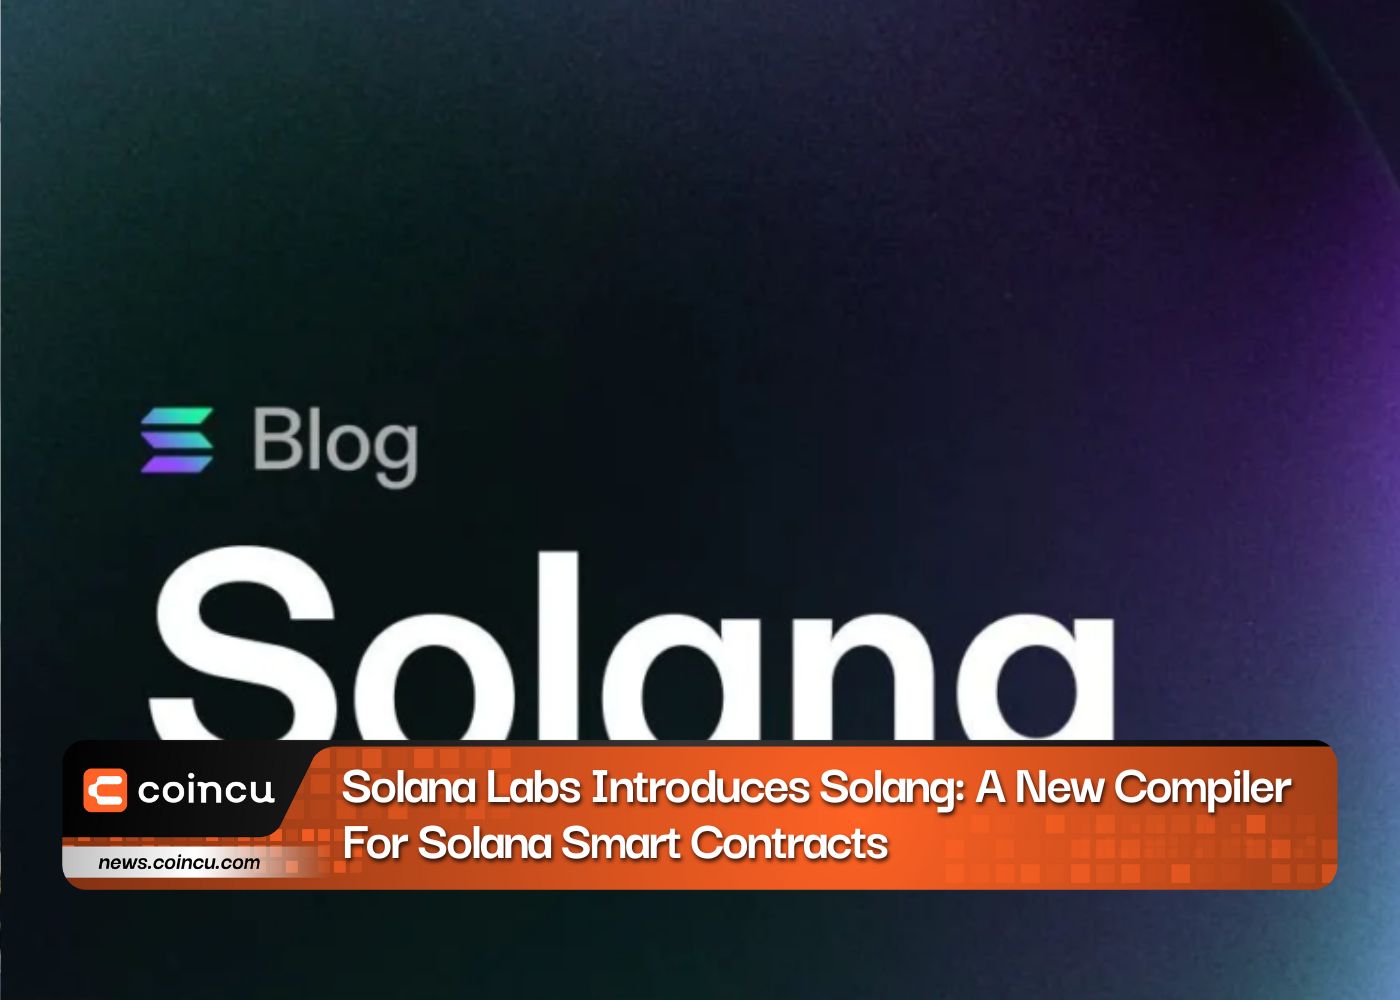 Solana Labs Introduces Solang: A New Compiler For Solana Smart Contracts